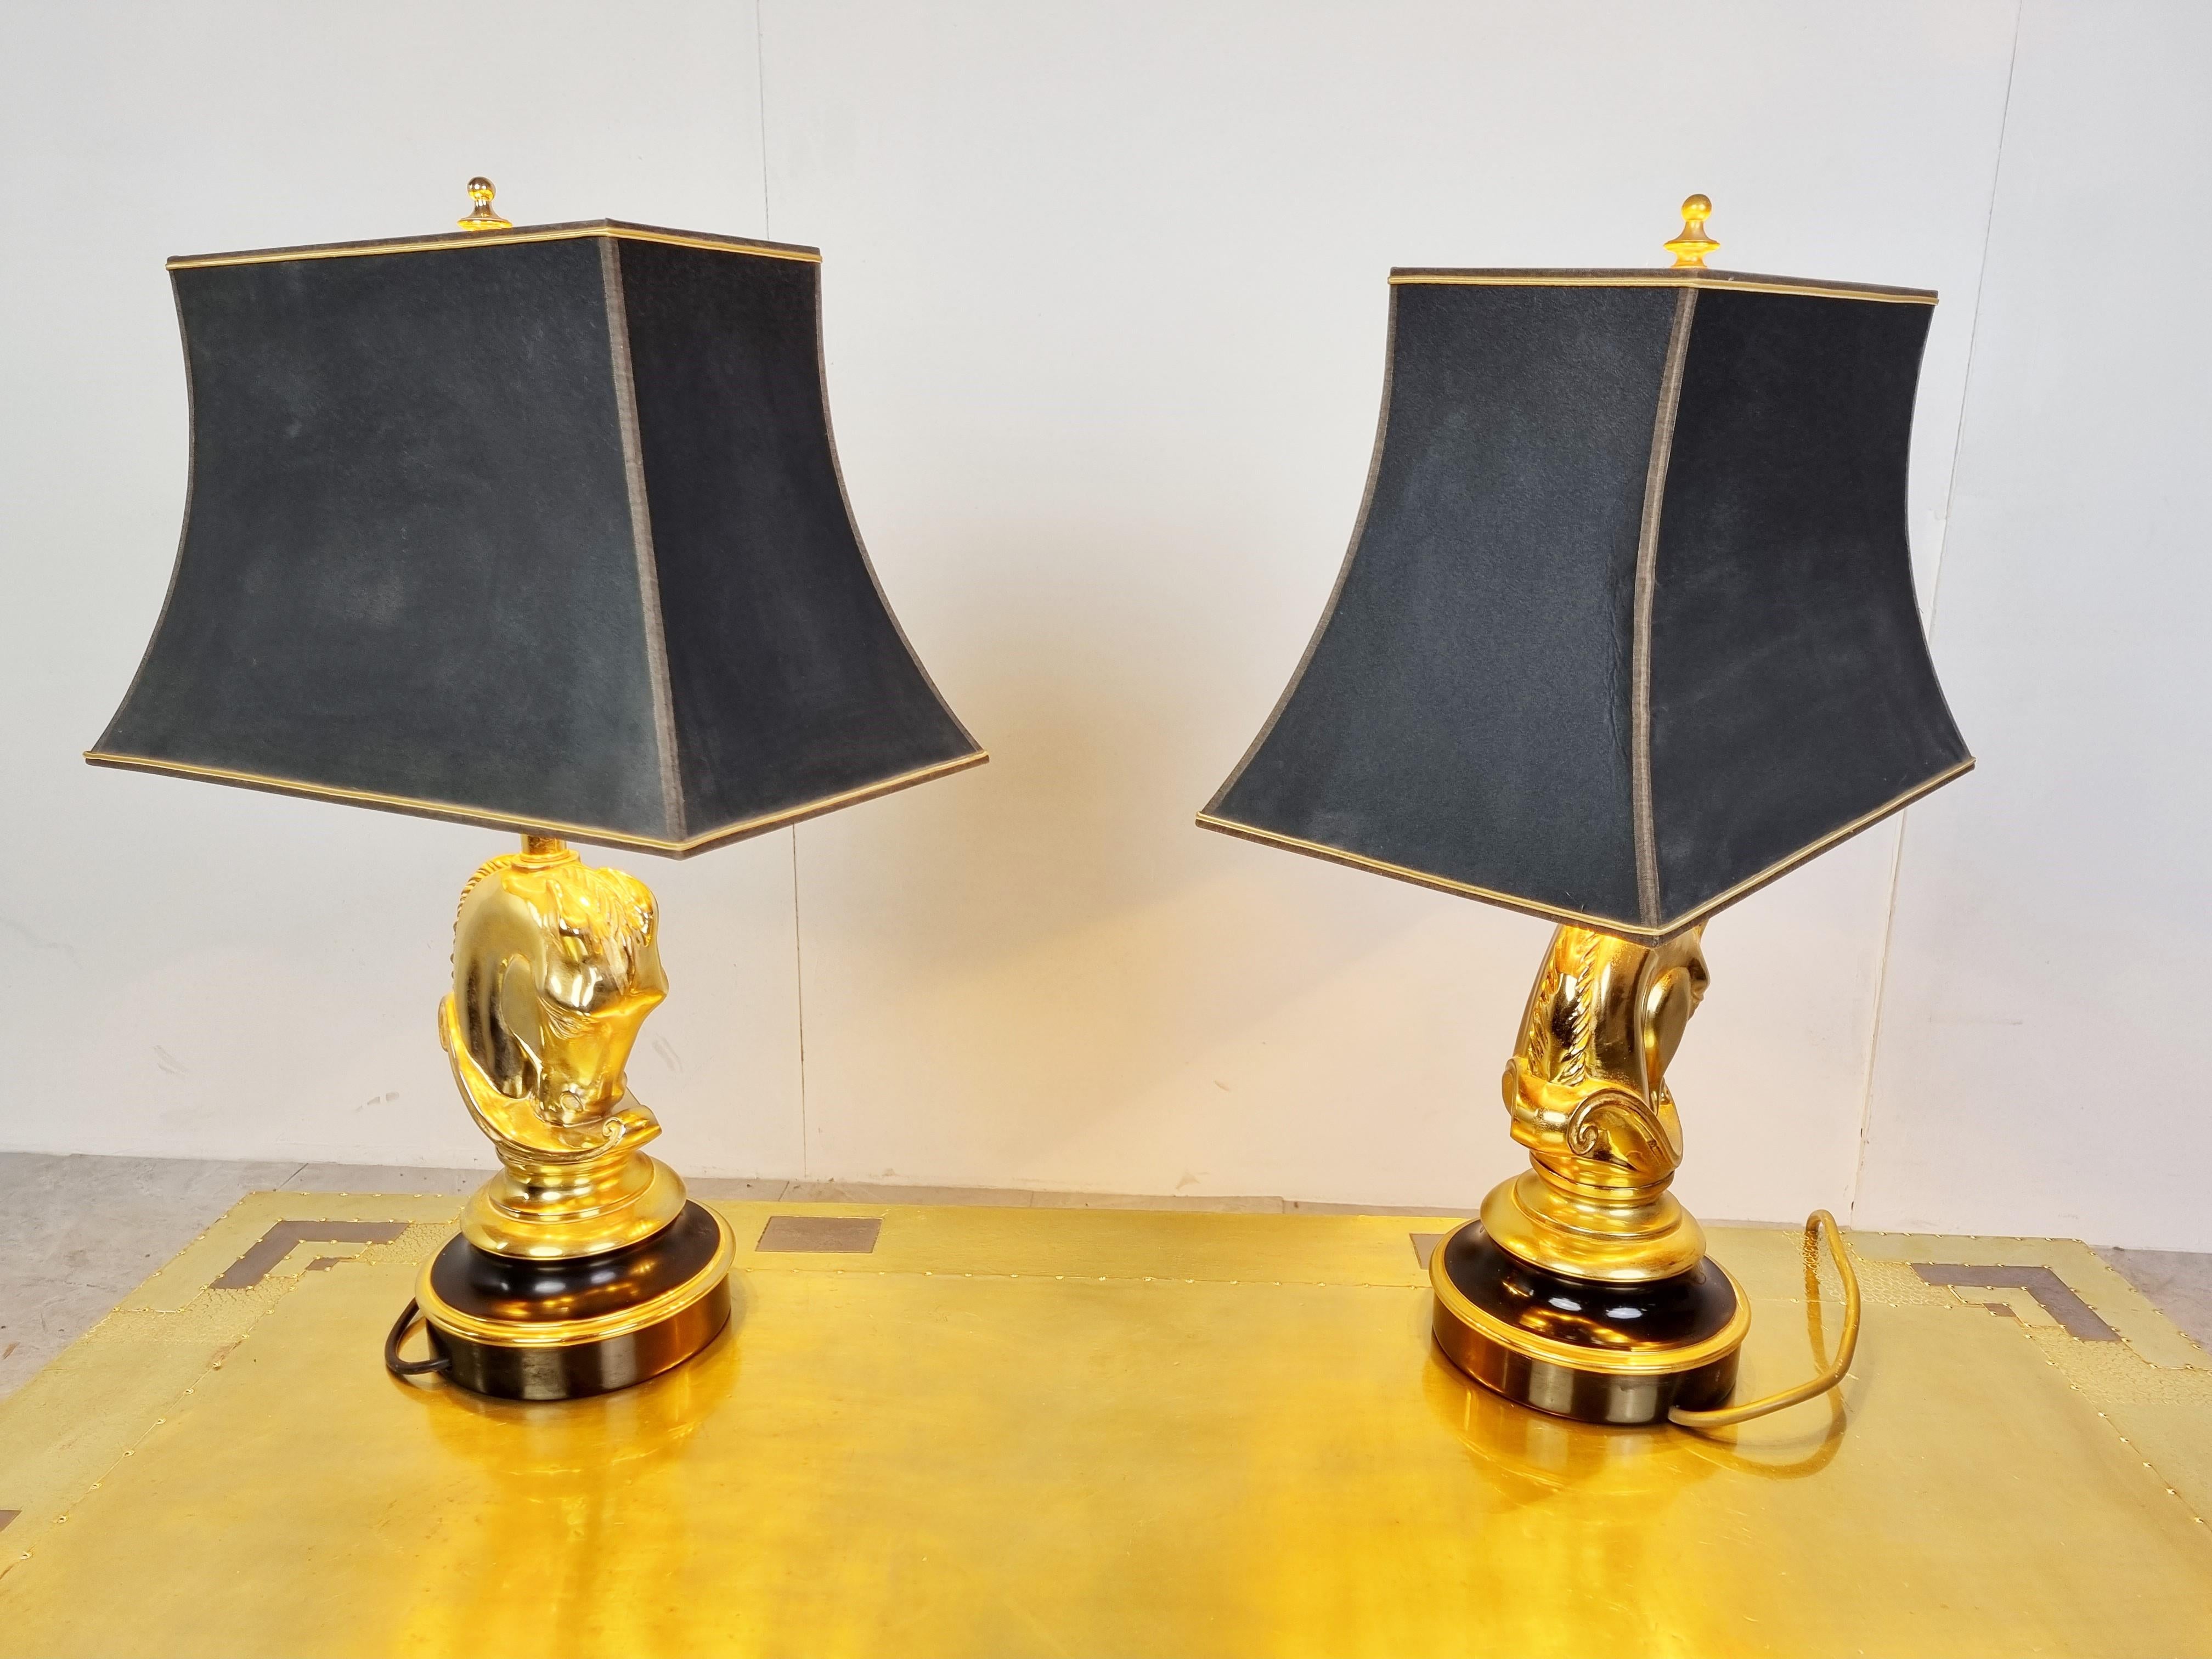 Pair of Brass Horse Head Table Lamps, 1970s Belgium For Sale 2